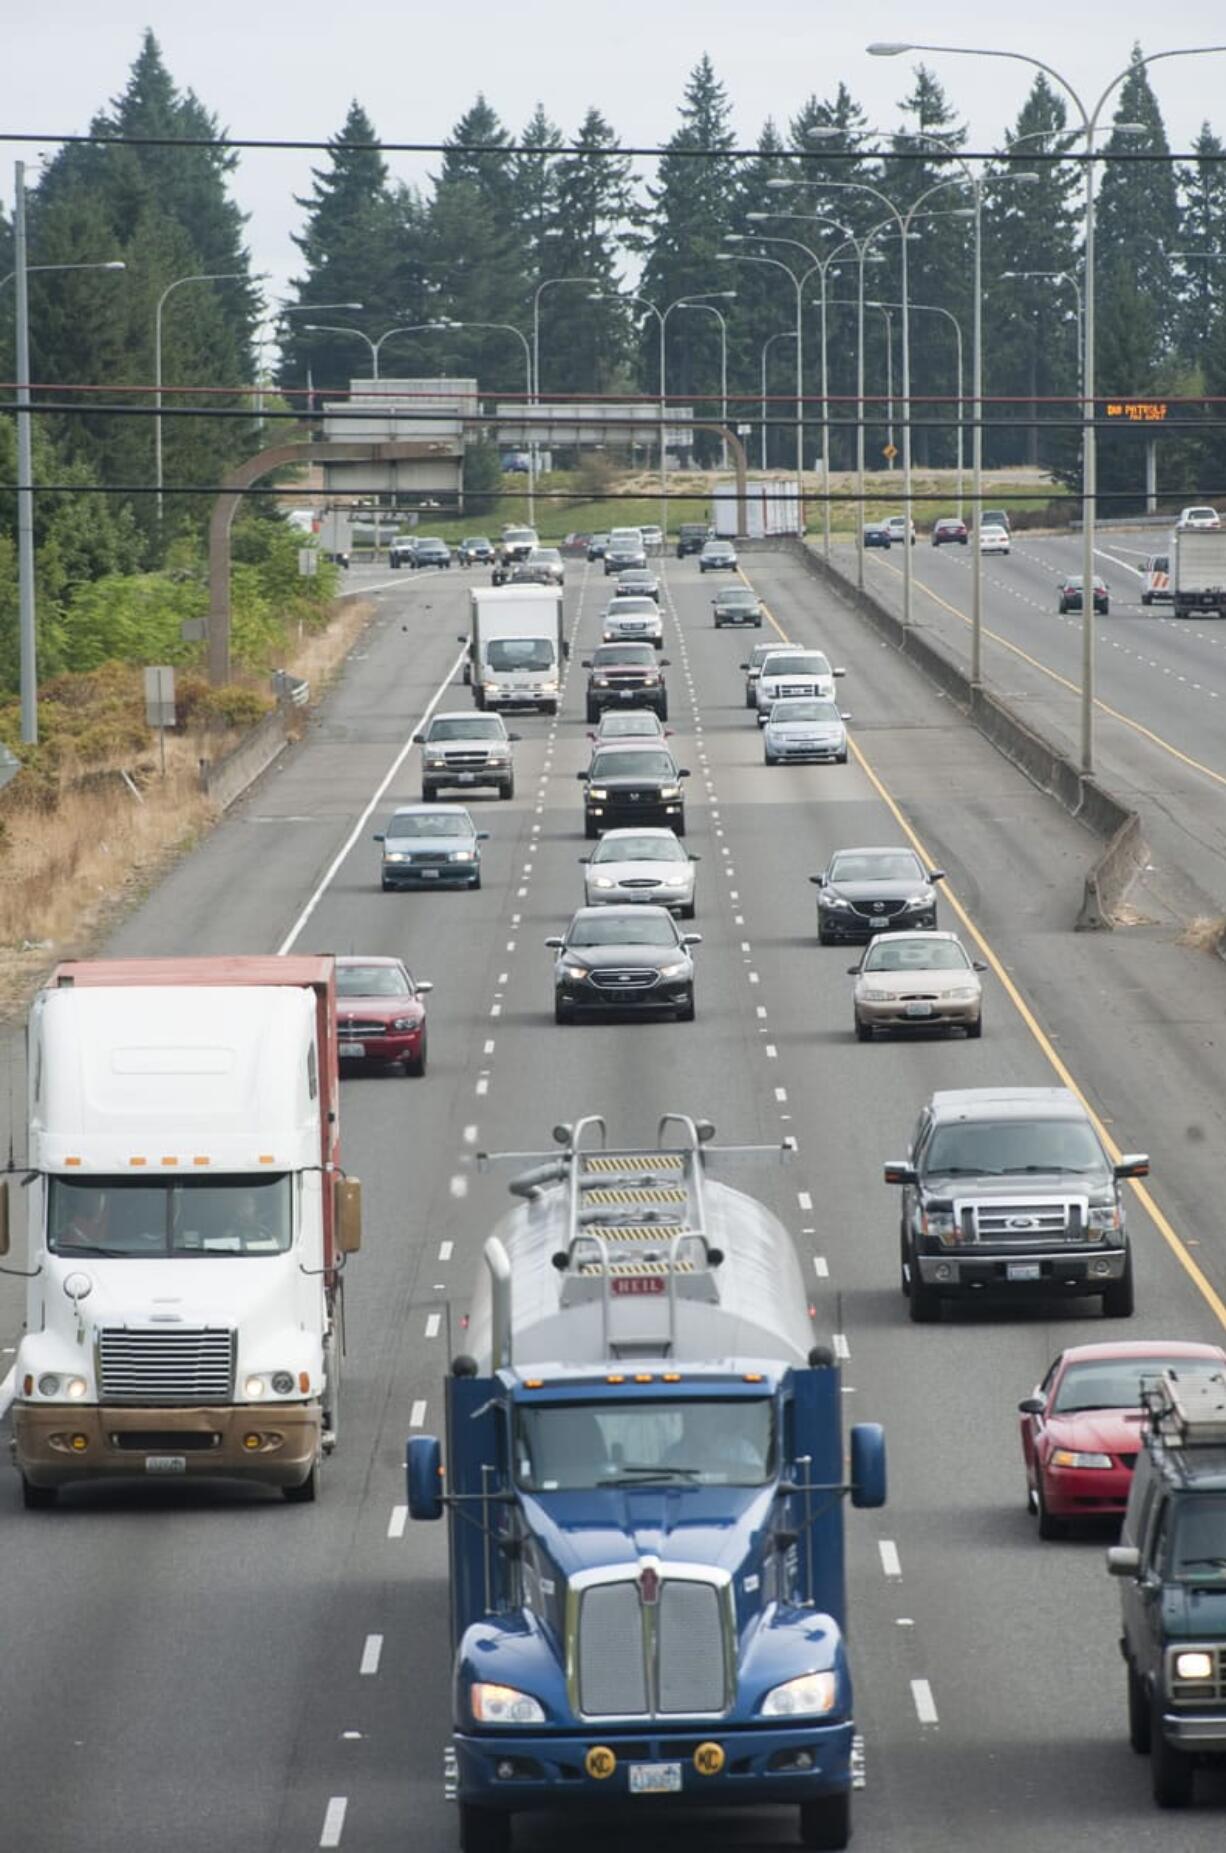 Traffic is seen along the I-5 in Vancouver Friday August 28, 2015. WSDOT says it has seen a 9 percent increase in truck volumes on Vancouver freeways so far this year.